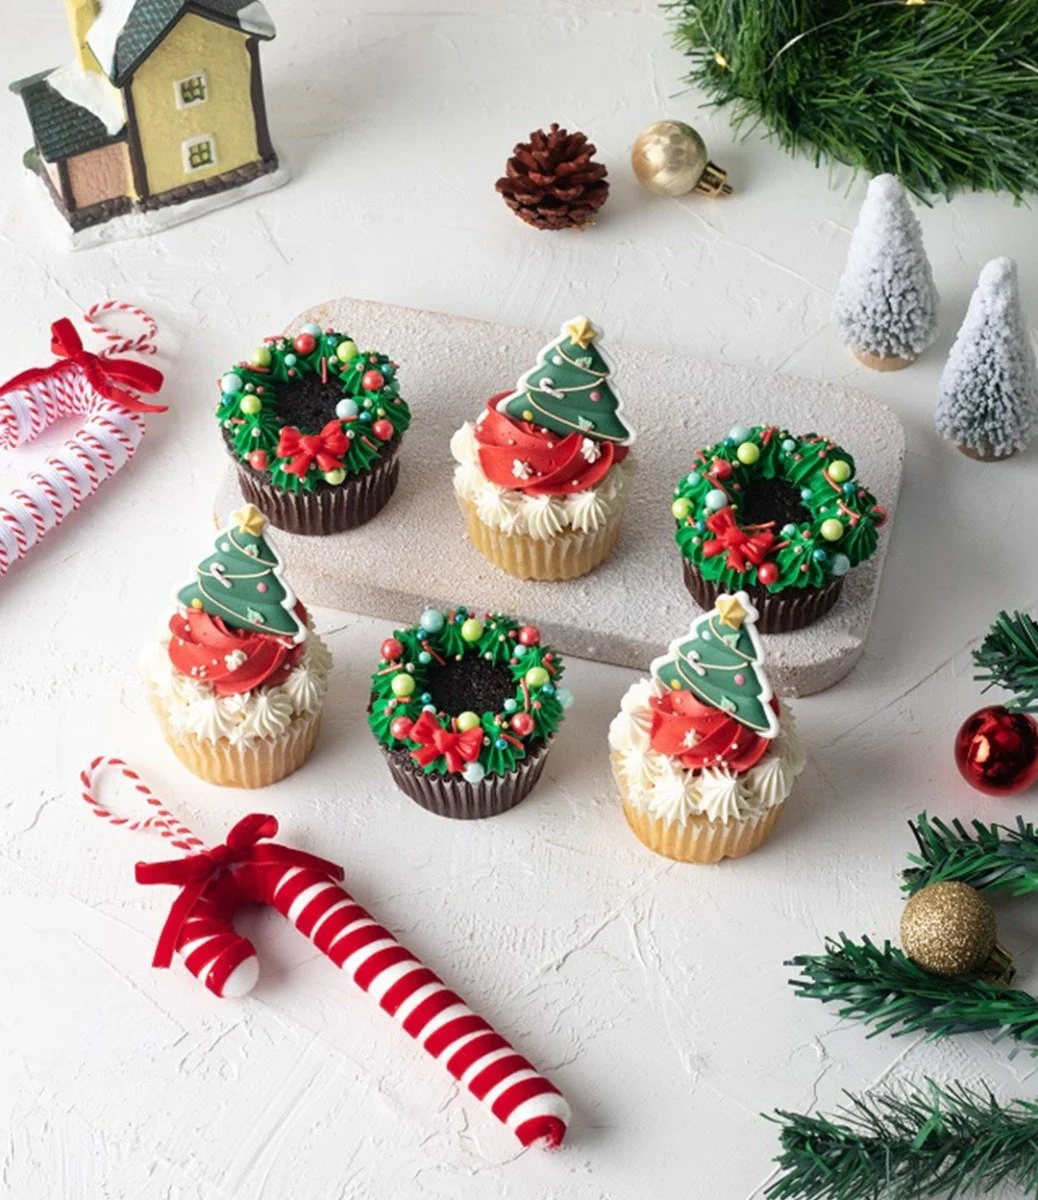 Christmas Tree and Wreath Cupcakes by Cake Social